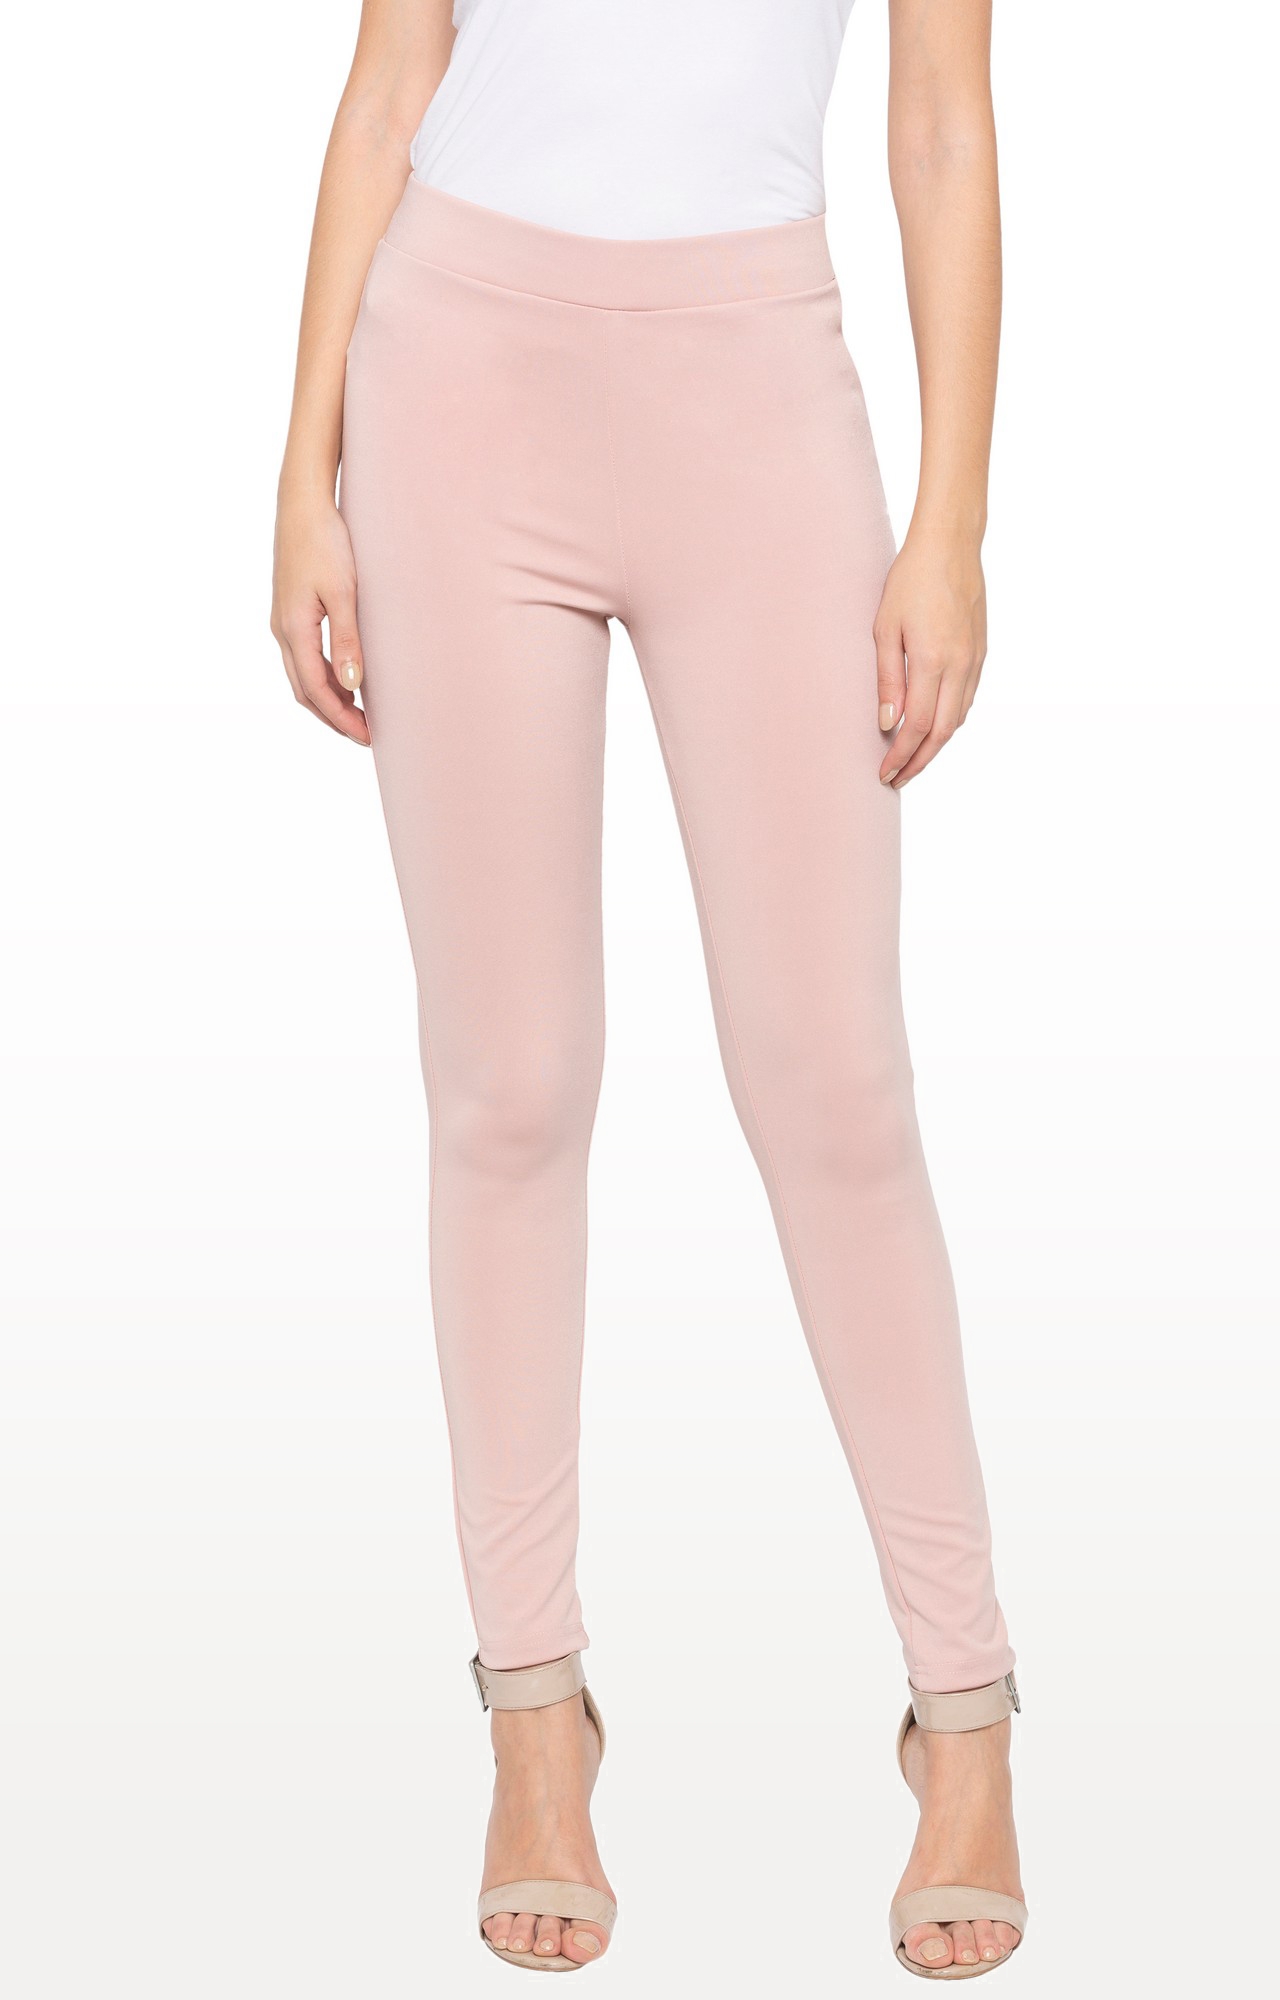 Women's Pink Polyester Solid Jeggings